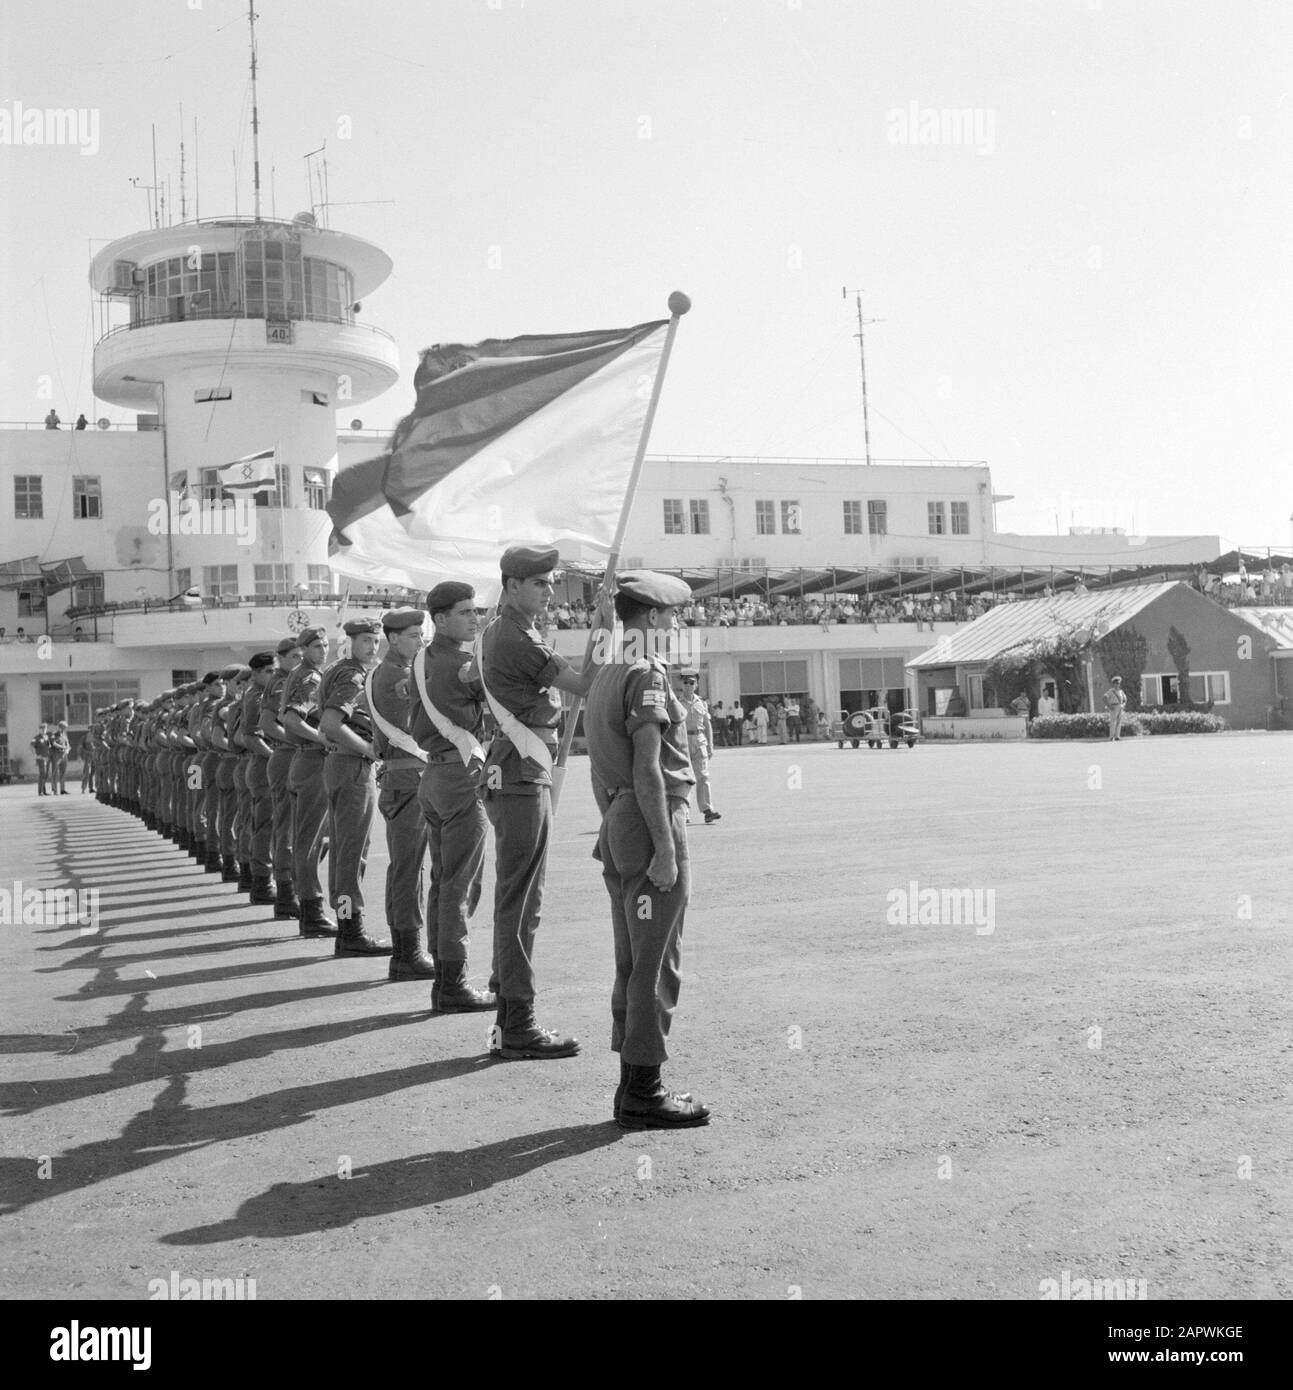 Israel: Lydda Airport (Lod)  Military honor hedge at the foot of the control tower Date: undated Location: Israel, Lod Airport, Lydda Airport Keywords: aviation, military, control towers, flags, airports Stock Photo